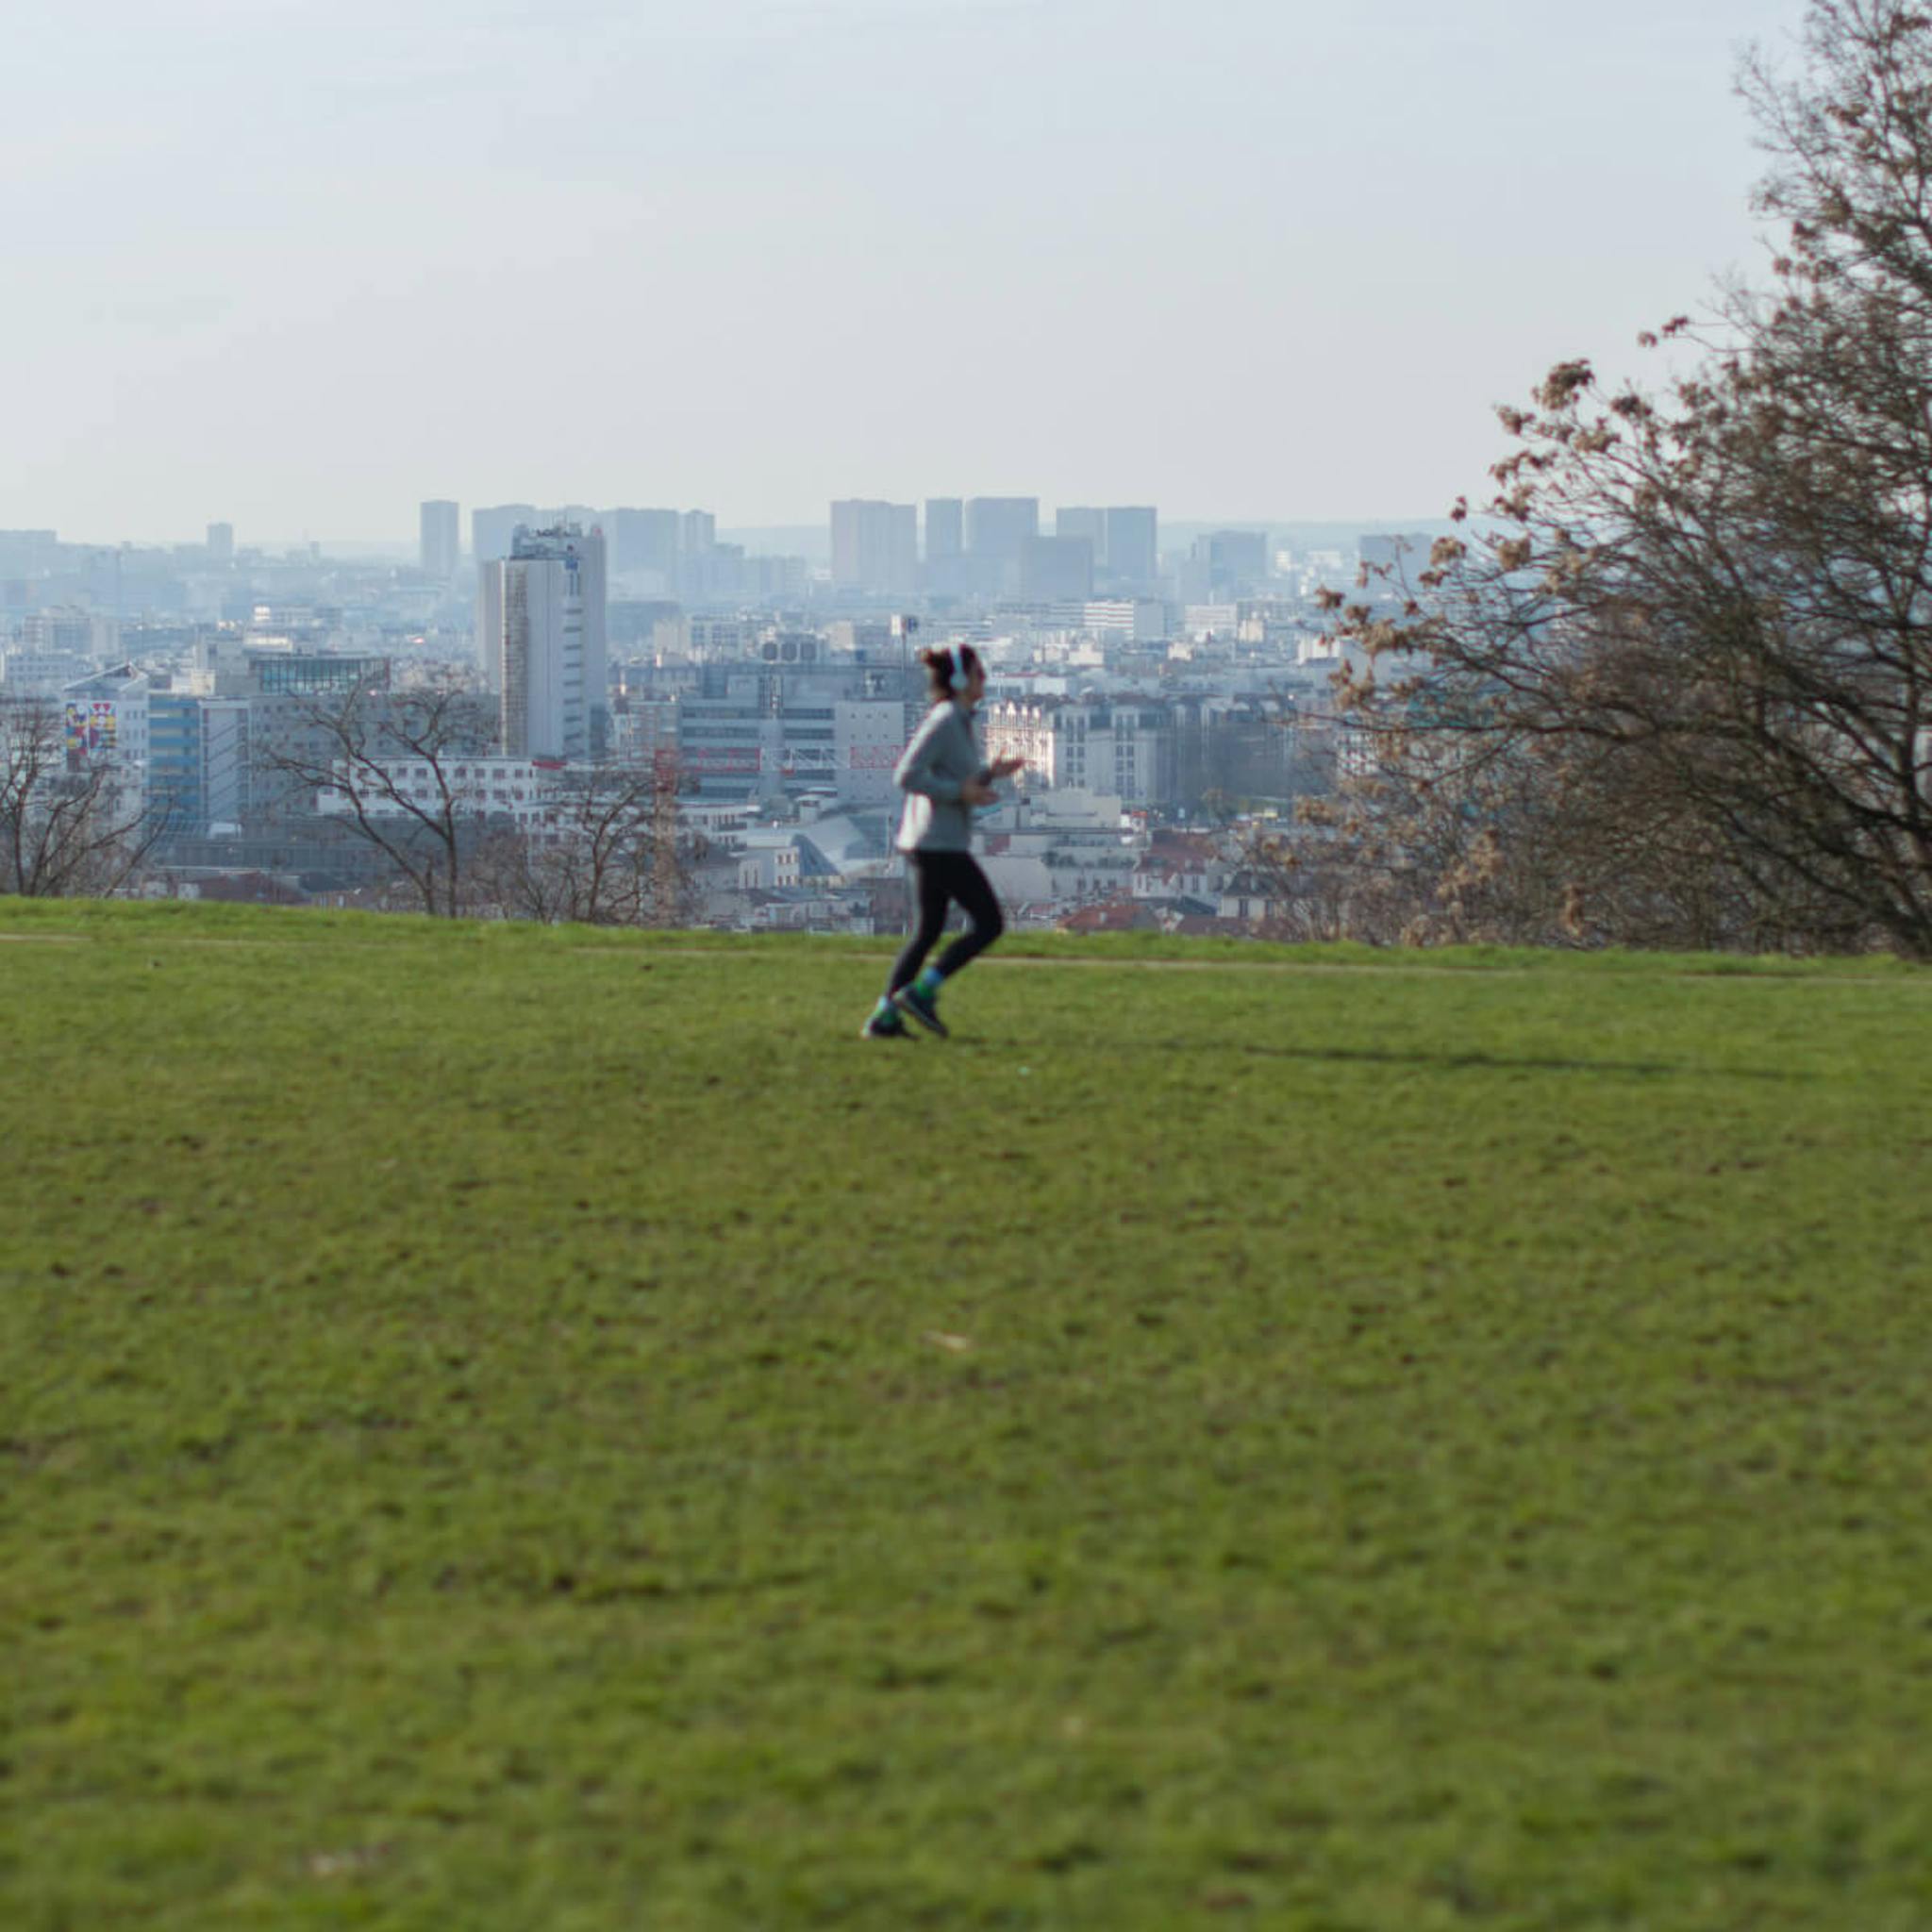 A jogger runs across a grassy hill with the sprawling cityscape of Paris in the background.